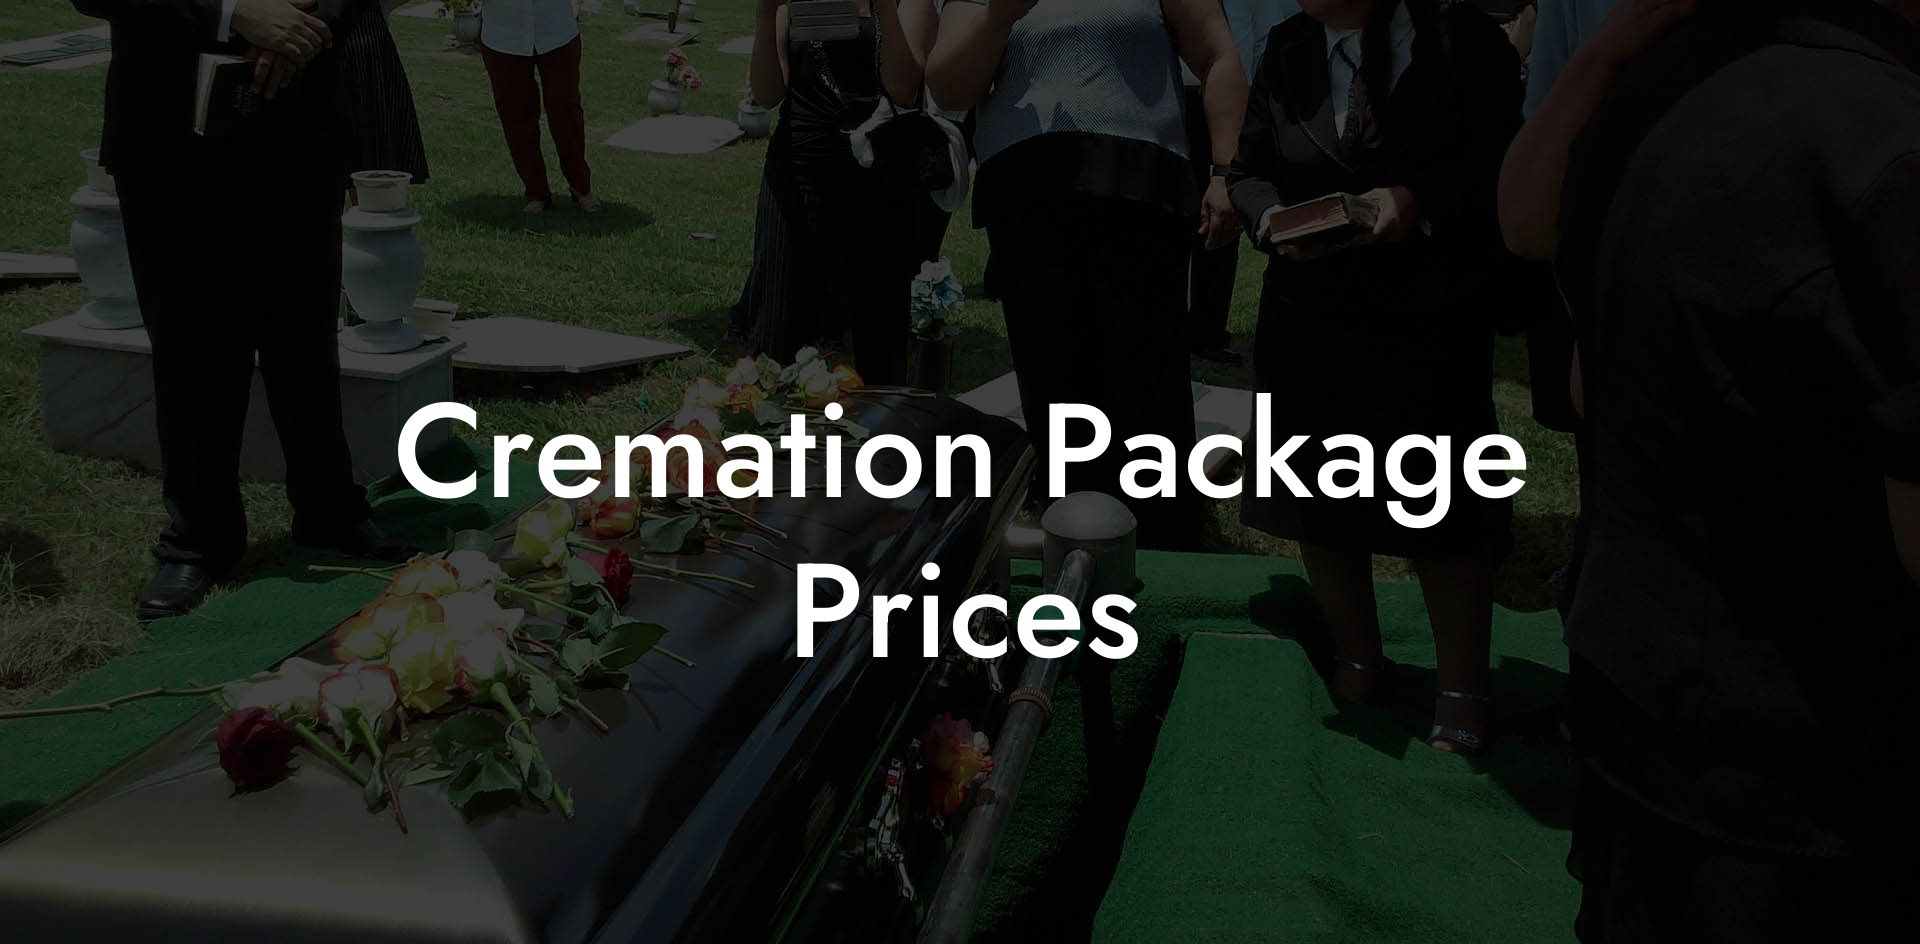 Cremation Package Prices